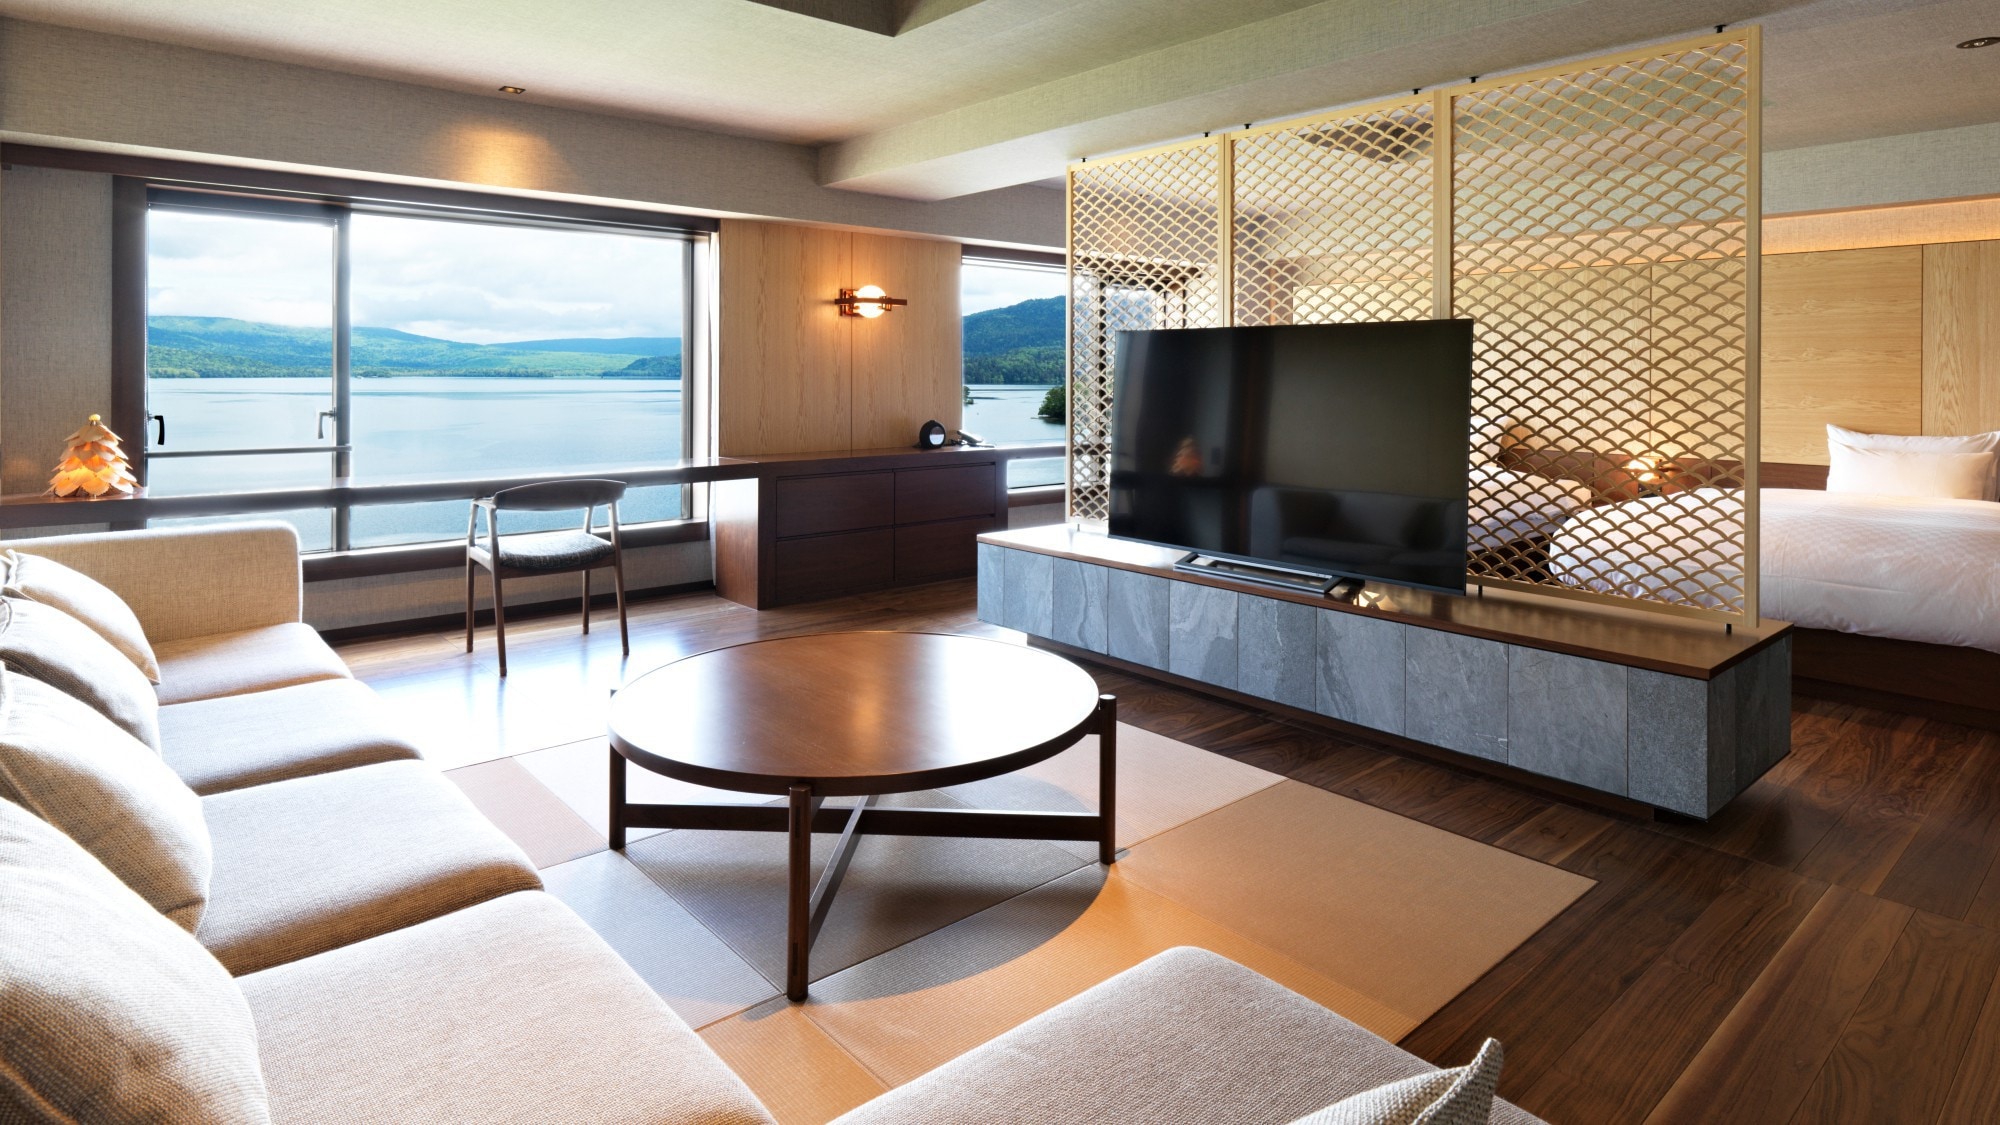 [Lake side] Example of DX Japanese-Western style room (with bath) / 72 square meters spacious room (image)